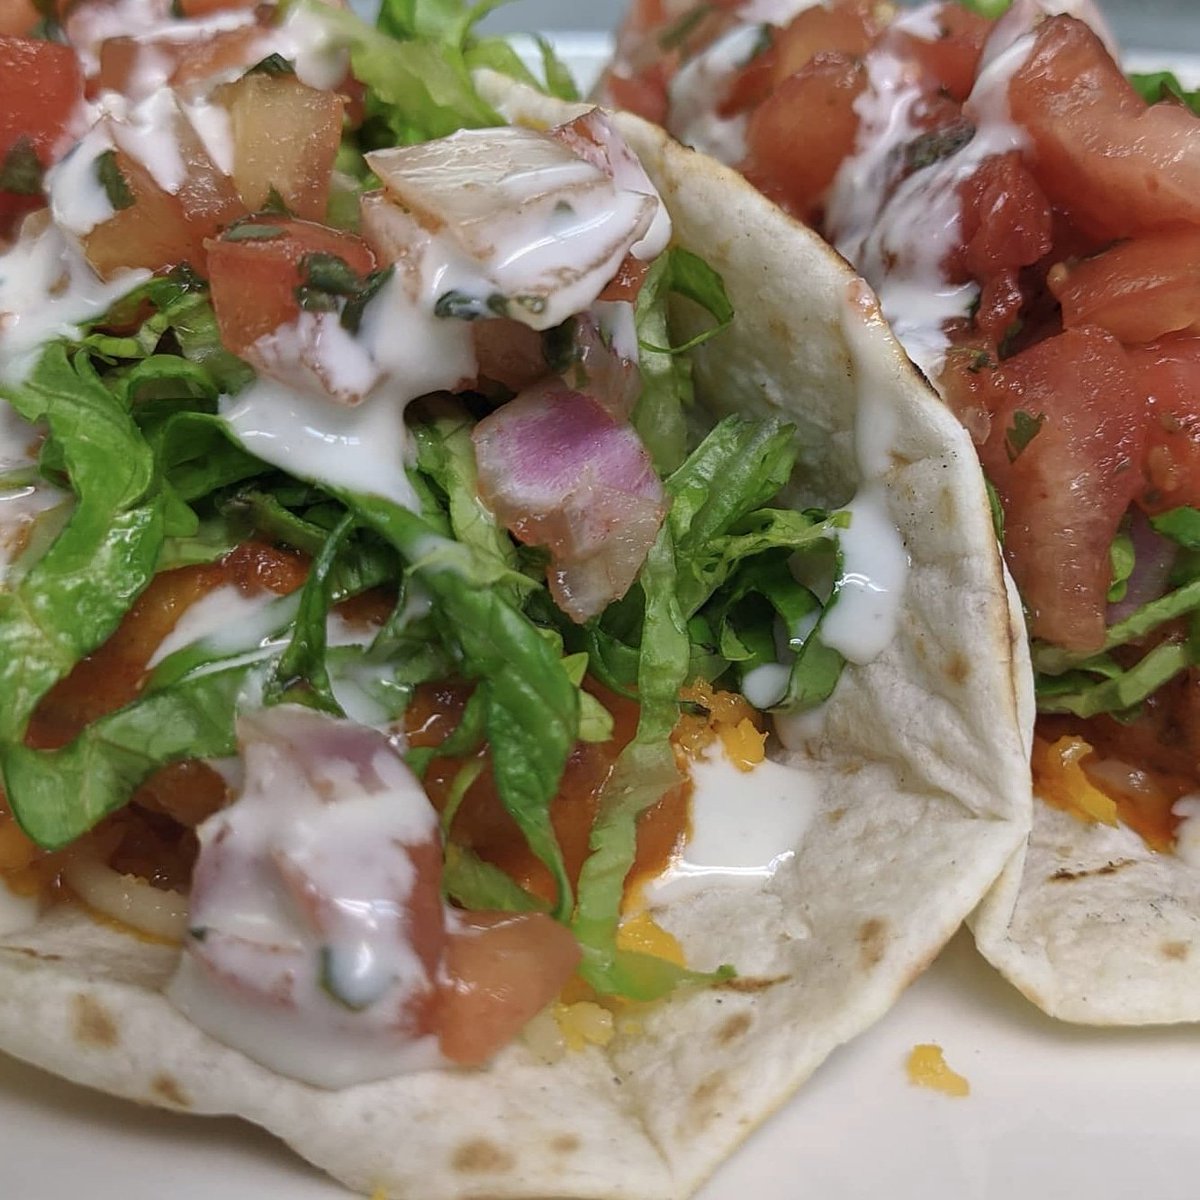 There is no greater reward for Snow Shoveling than Delicious Tacos
#Mississauga #tacos #Meadowvale #cauliflowertacos #tacolife #tacolover #chickentacos #fishtacos #yummy #tacotuesday #takeout #delivery #curbside #staysafe #wearamask #snow #shovelingsnow #winter #Streetsville